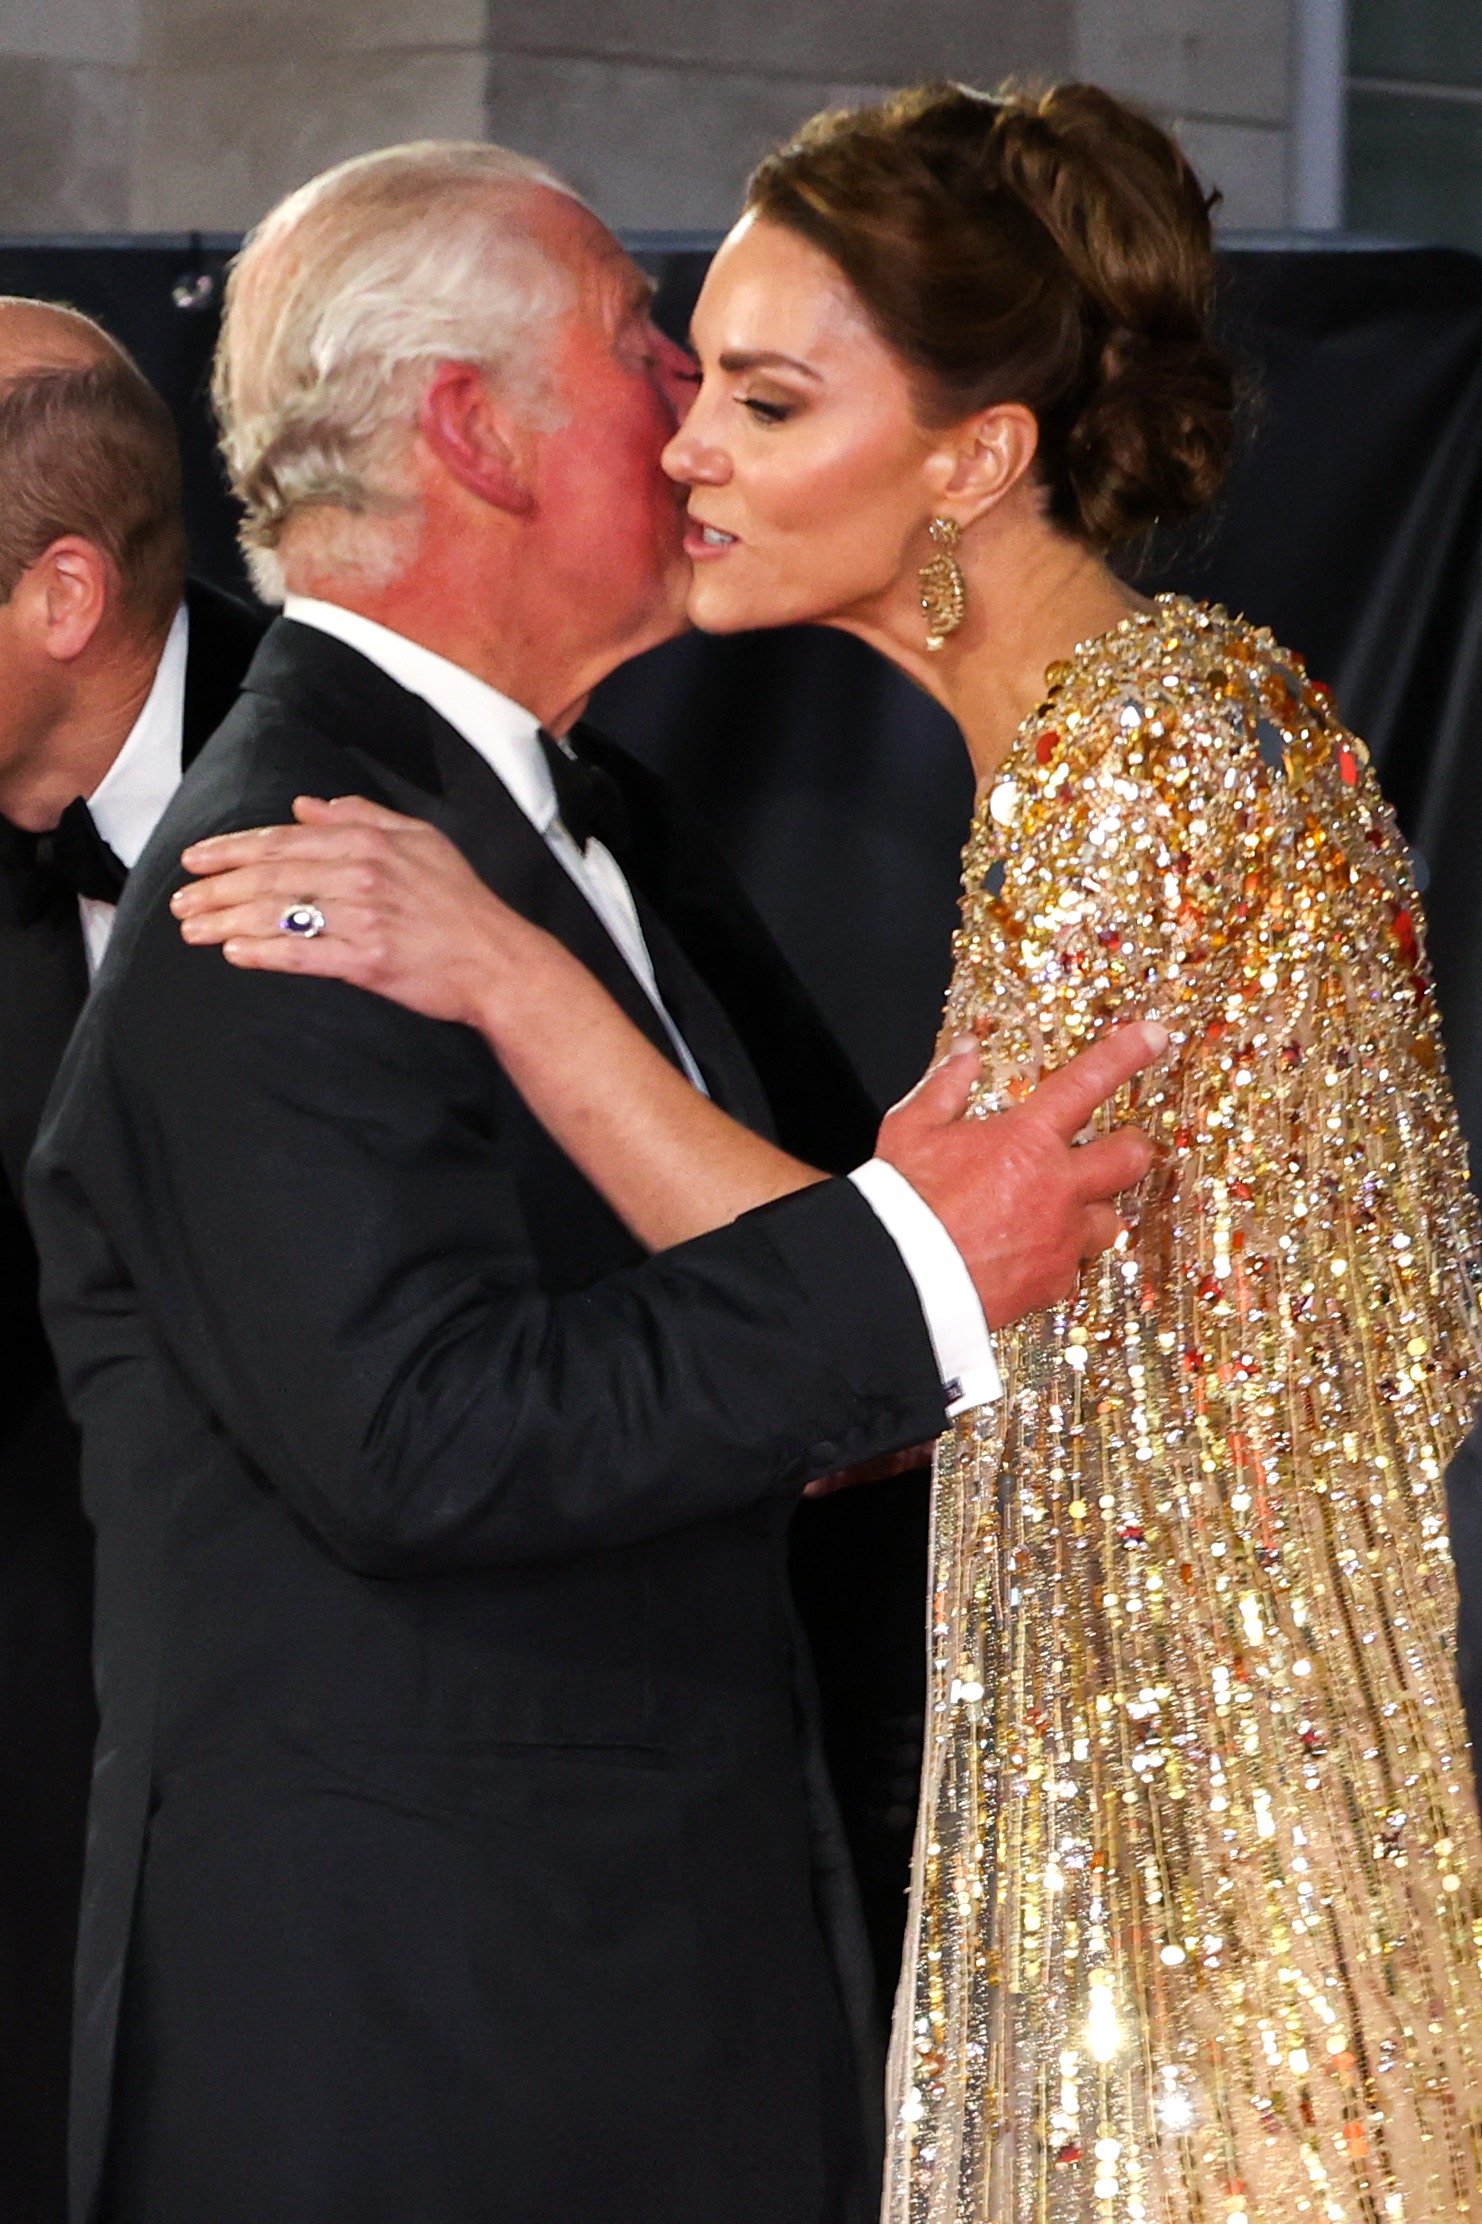 King Charles III kisses the Princess of Wales Kate Middleton at the premiere of the James Bond 007 film "No Time to Die" in West London on September 28, 2021. | Source: Getty Images